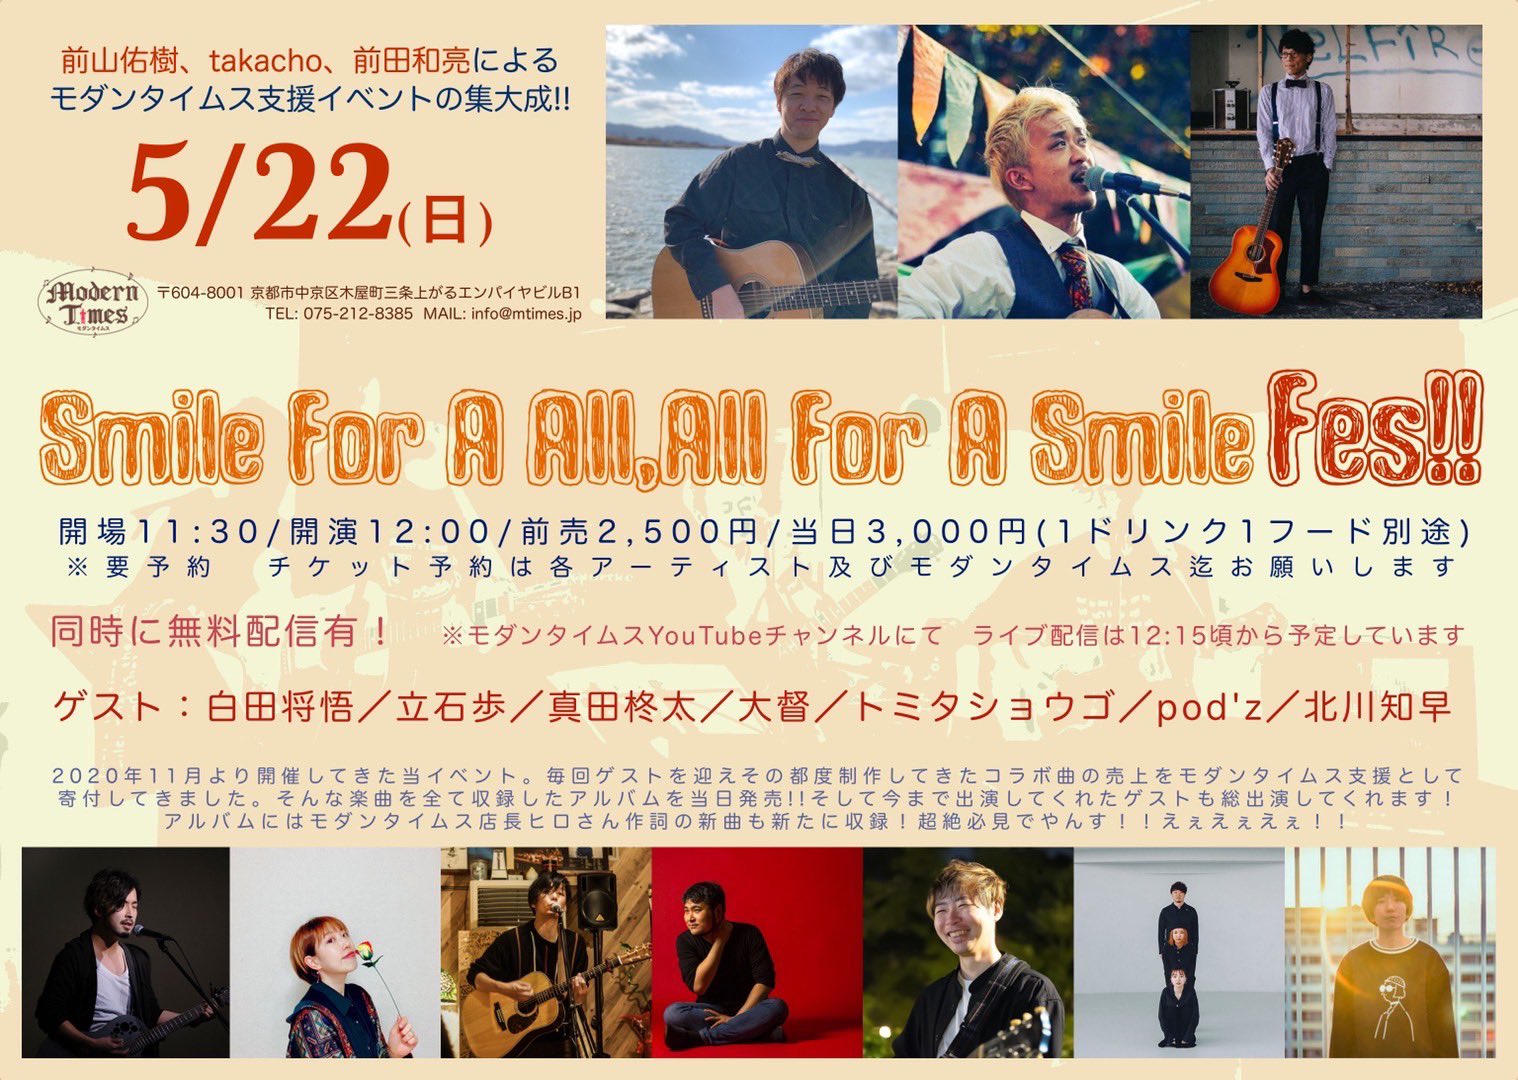 Smile for a all,all for a smile fes！！